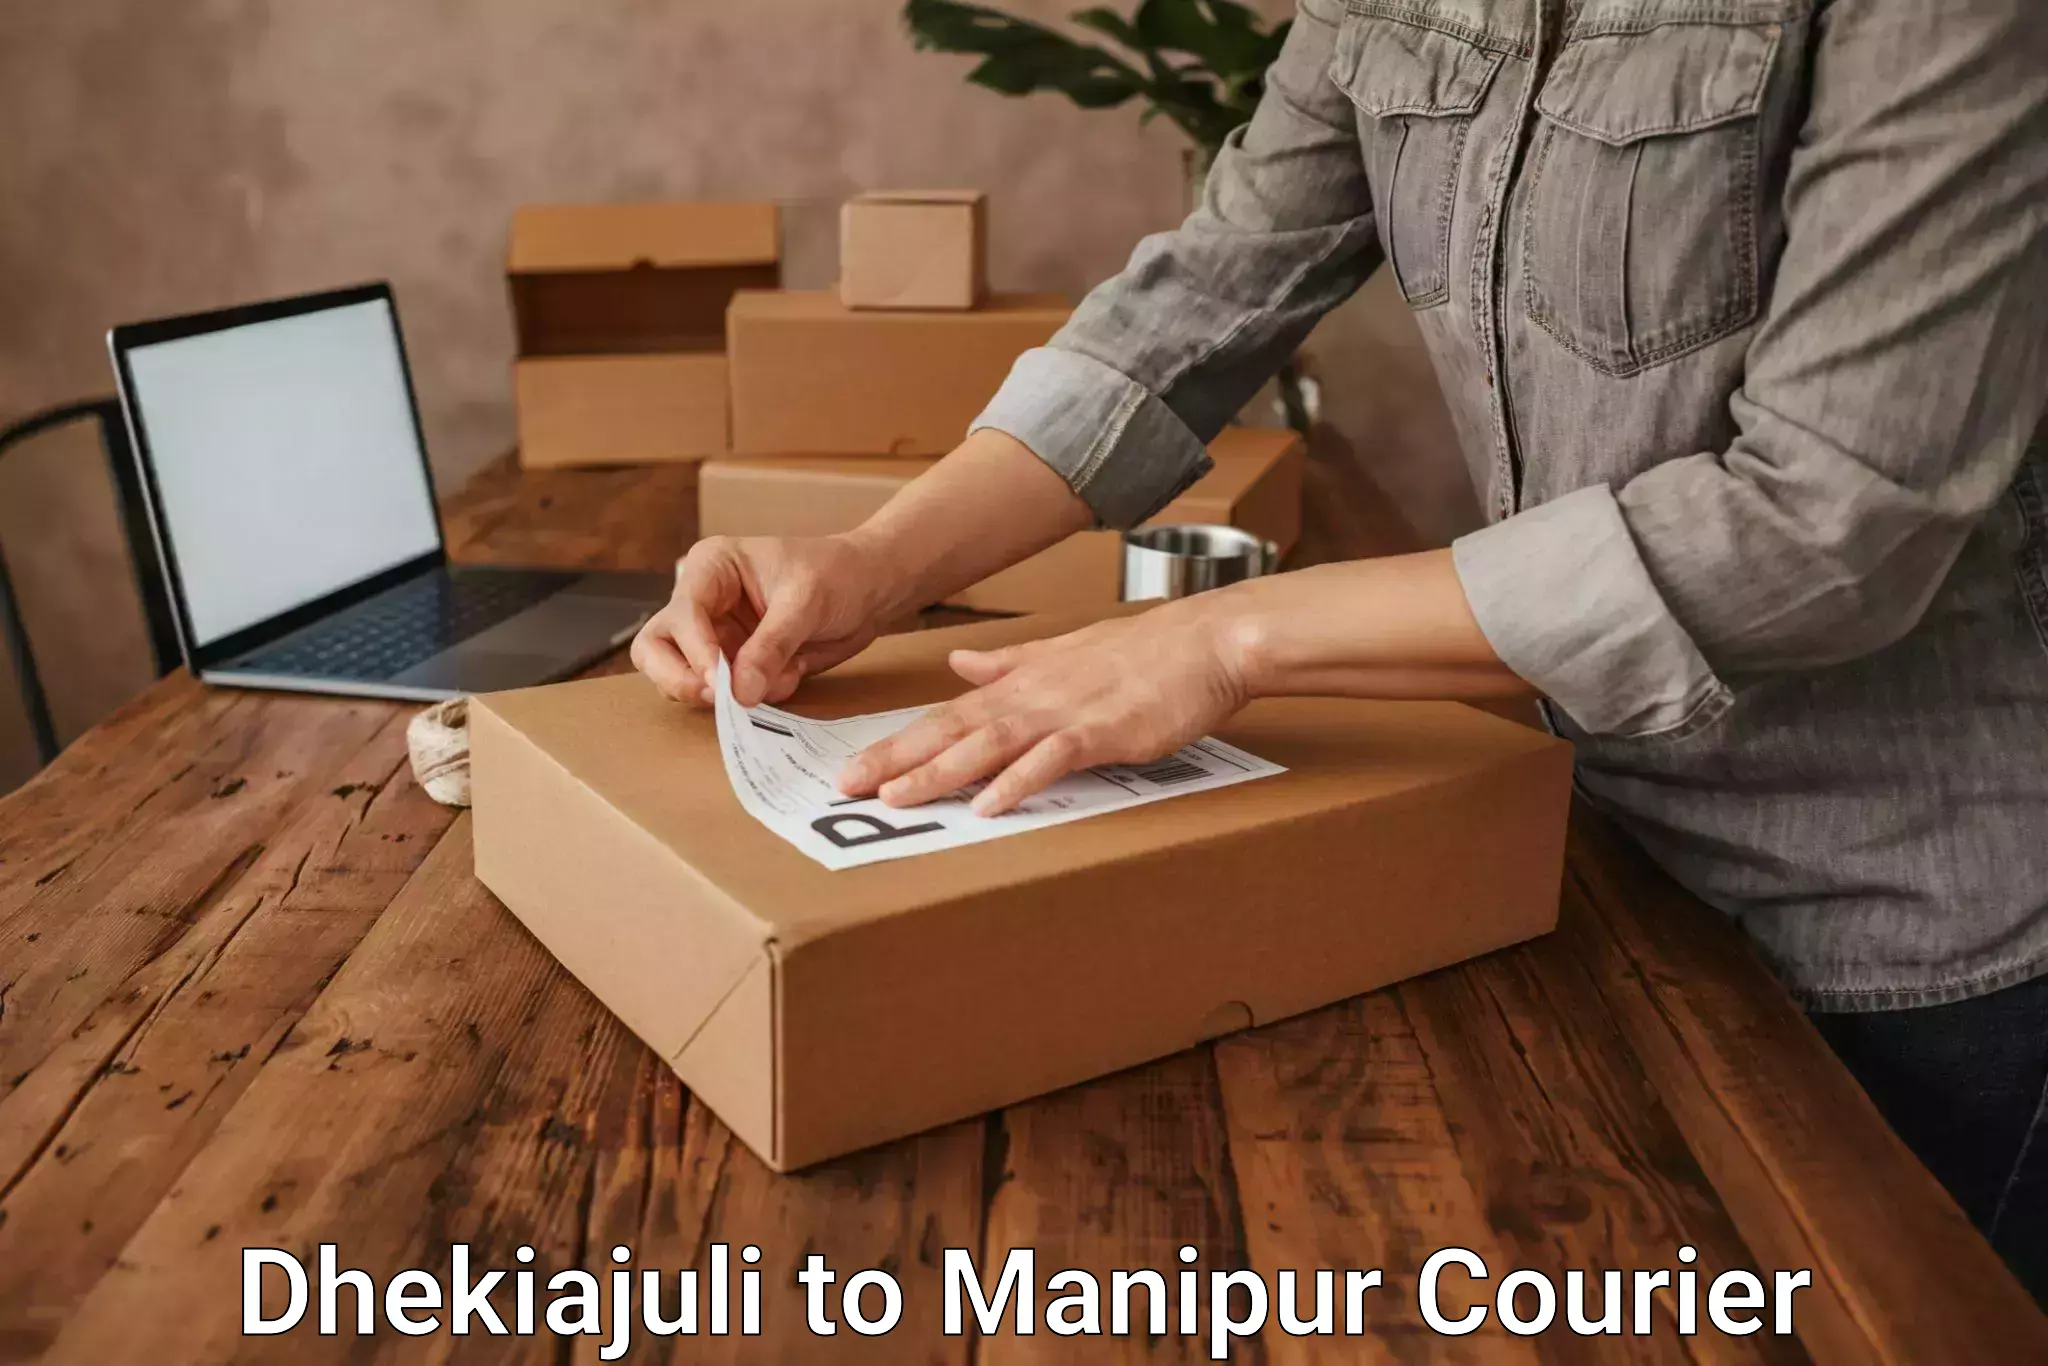 Global courier networks Dhekiajuli to Manipur